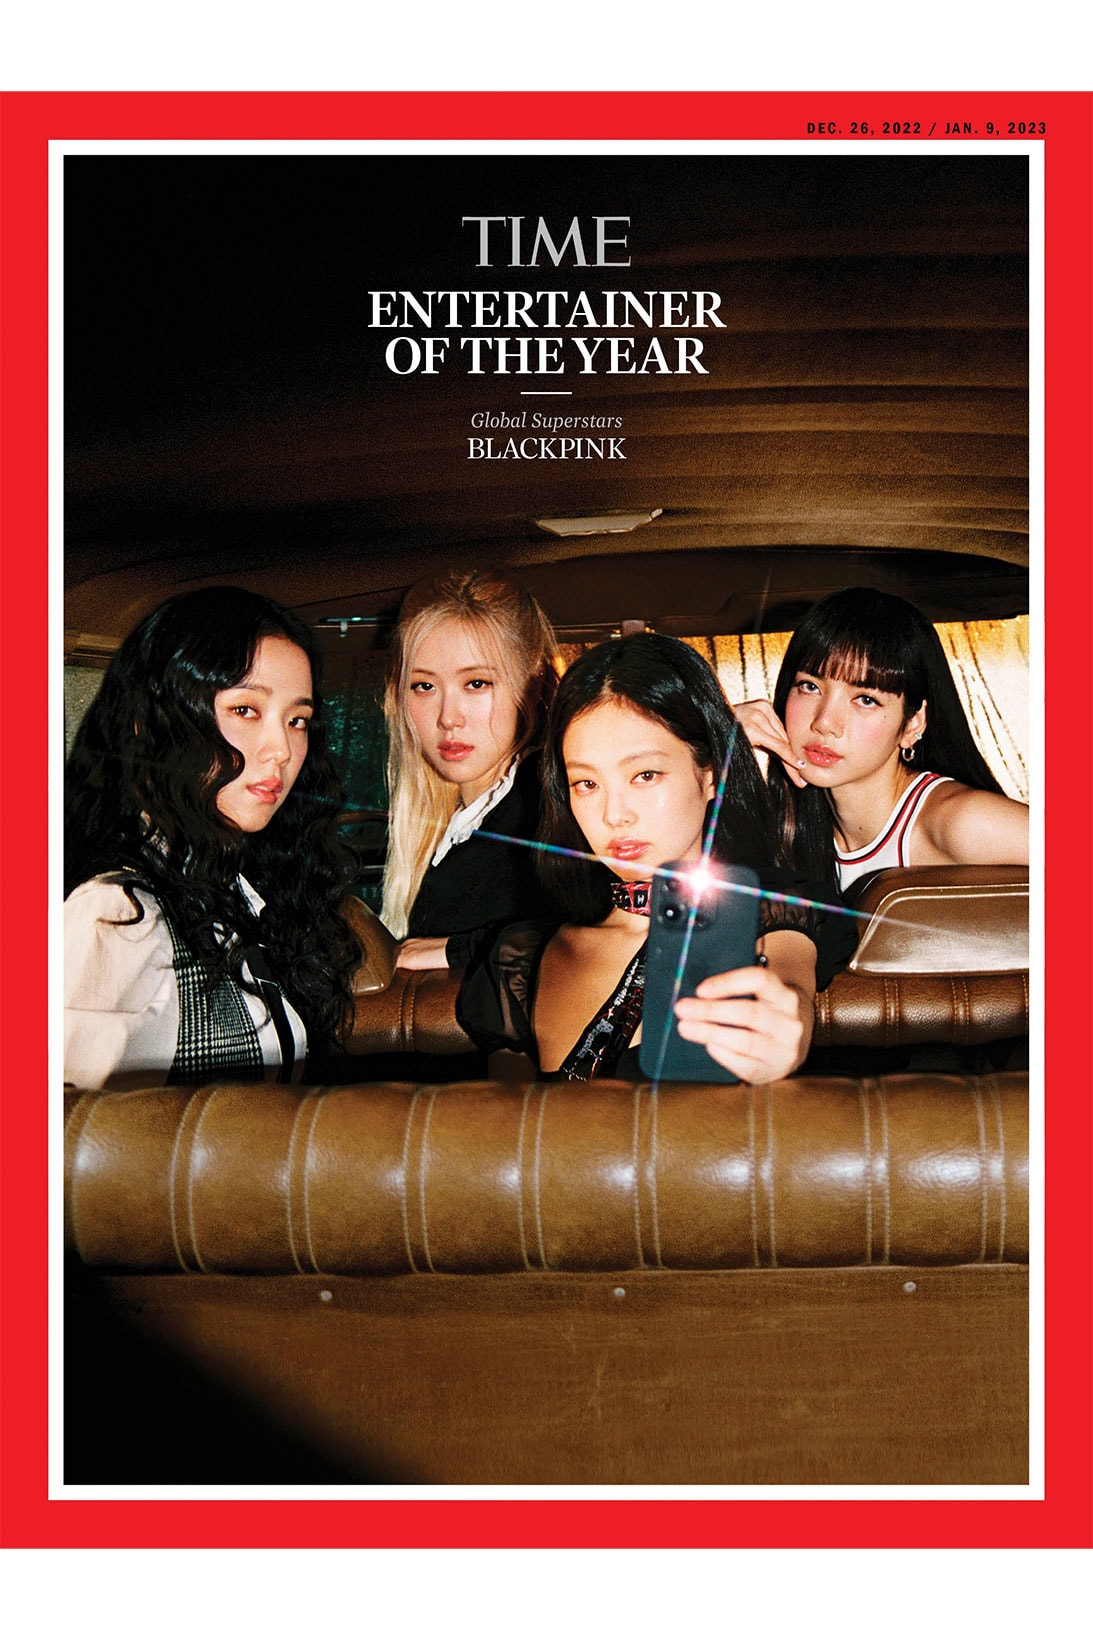 BLACKPINK TIME Entertainer of the Year K-pop Jennie Lisa Rose Jisoo Announcement Image